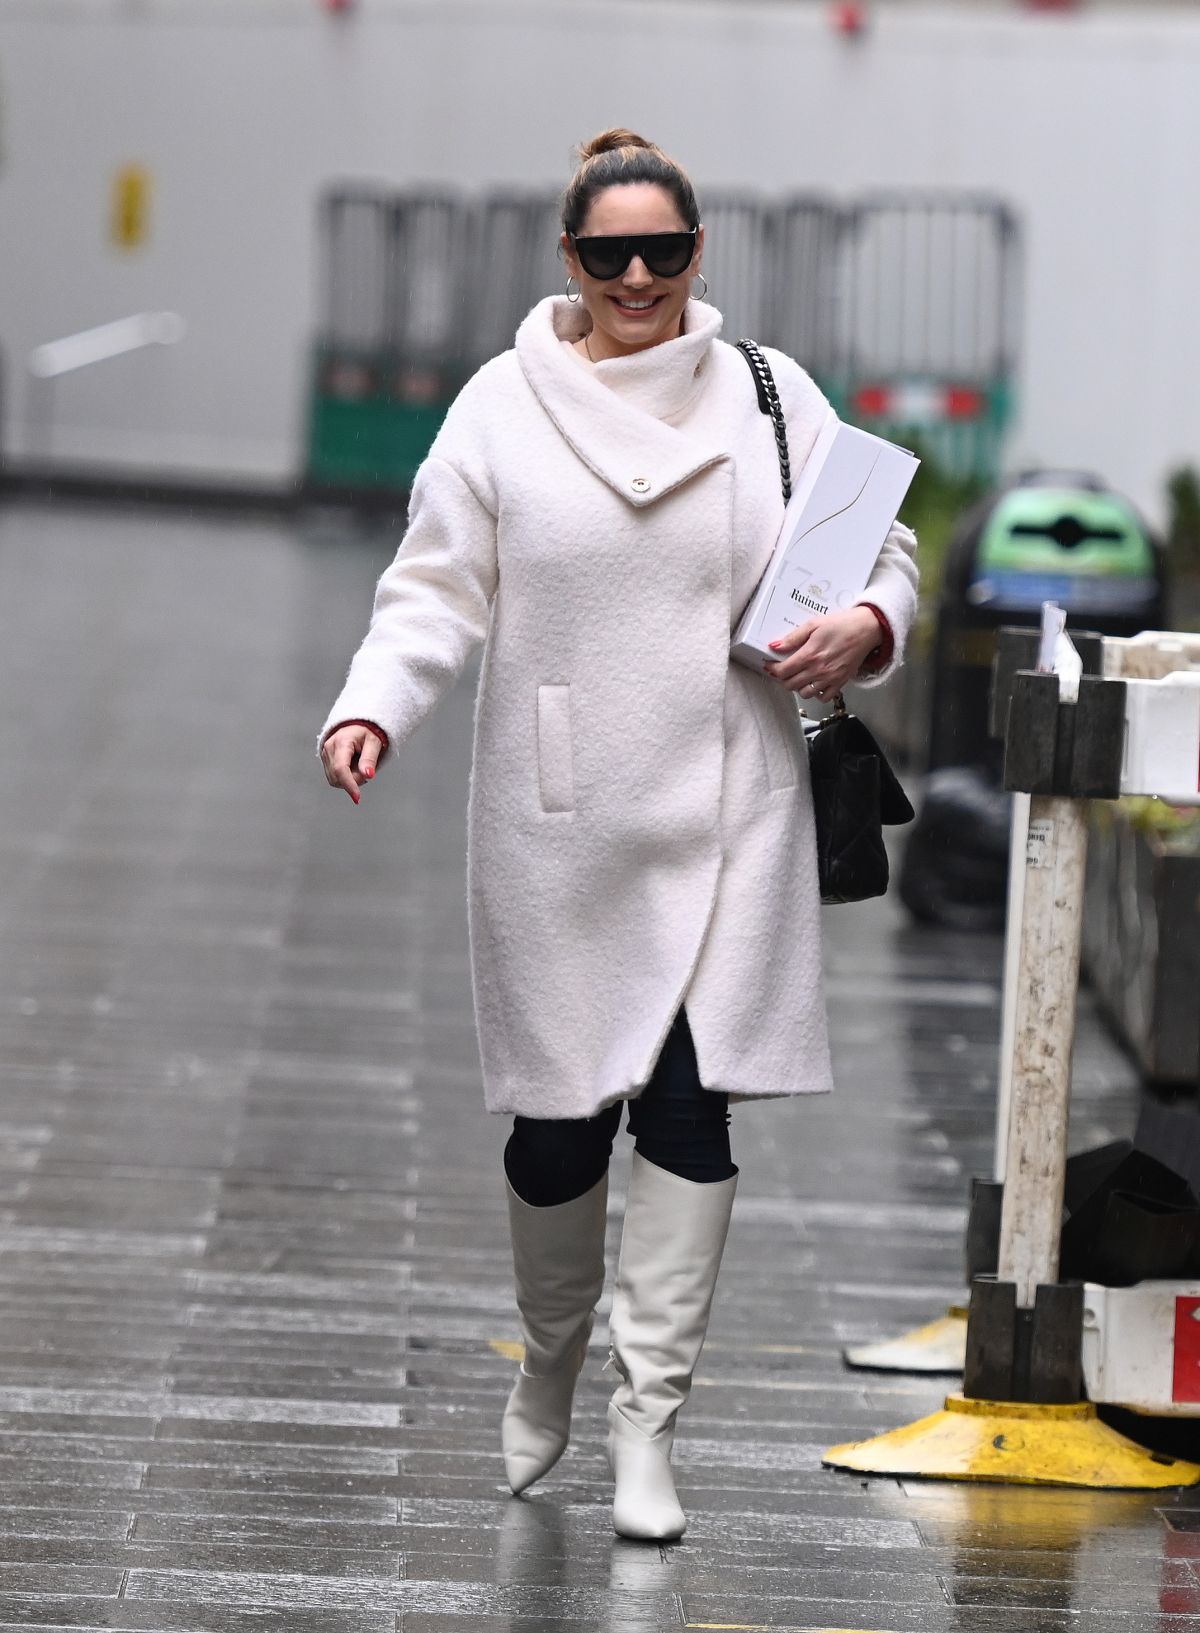 179310292_kelly-brook-in-a-white-coat-and-boots-at-global-radio-in-london-12-23-2020-6.jpg